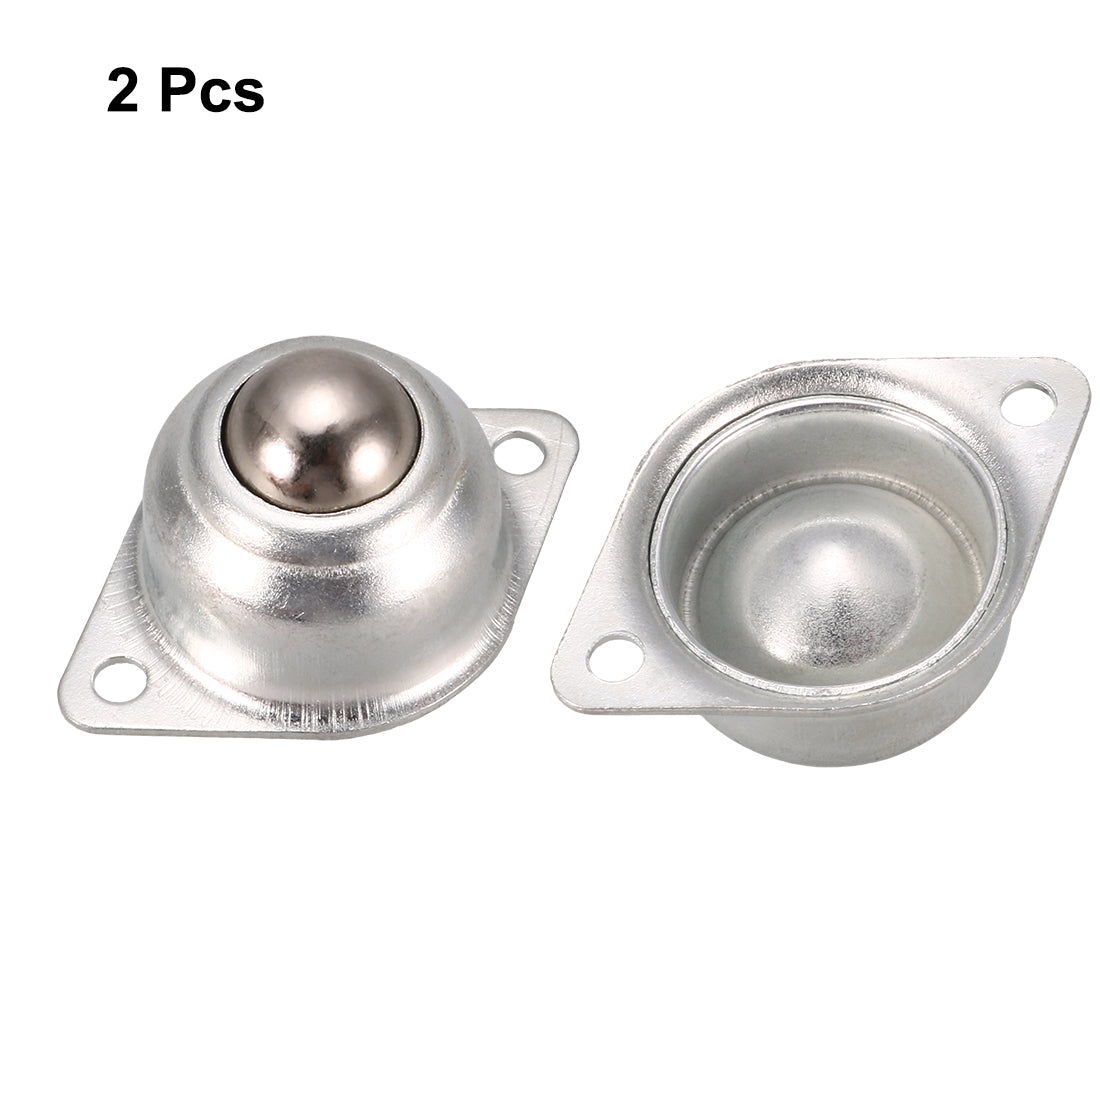 uxcell Uxcell 14mm Dia Ball Transfer Bearing Unit Casters Universal Wheel Silver Tone 2pcs